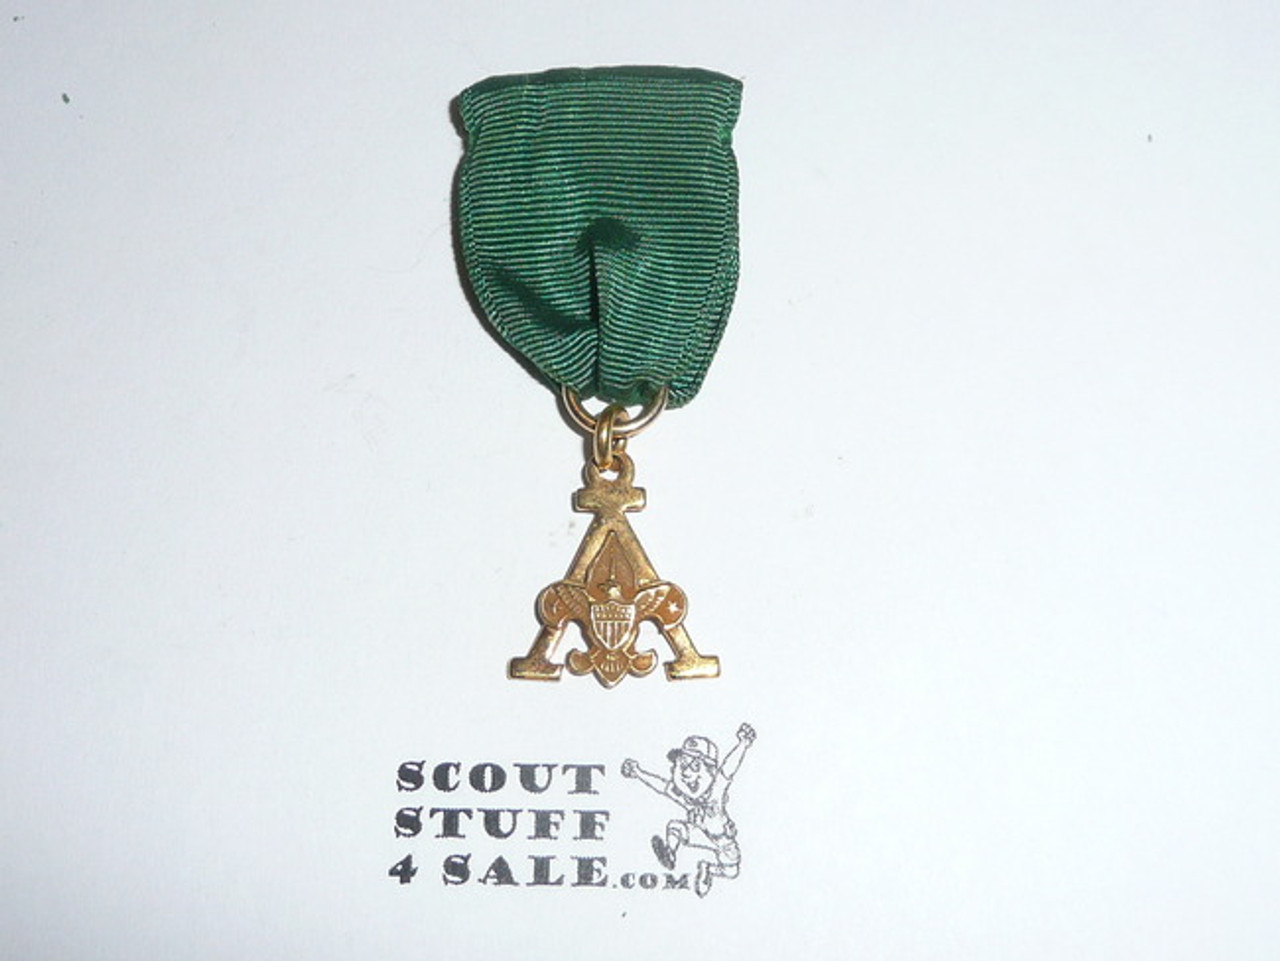 Scouter's Training Award Medal with Green Ribbon (A Design), 1948-1956, gold content